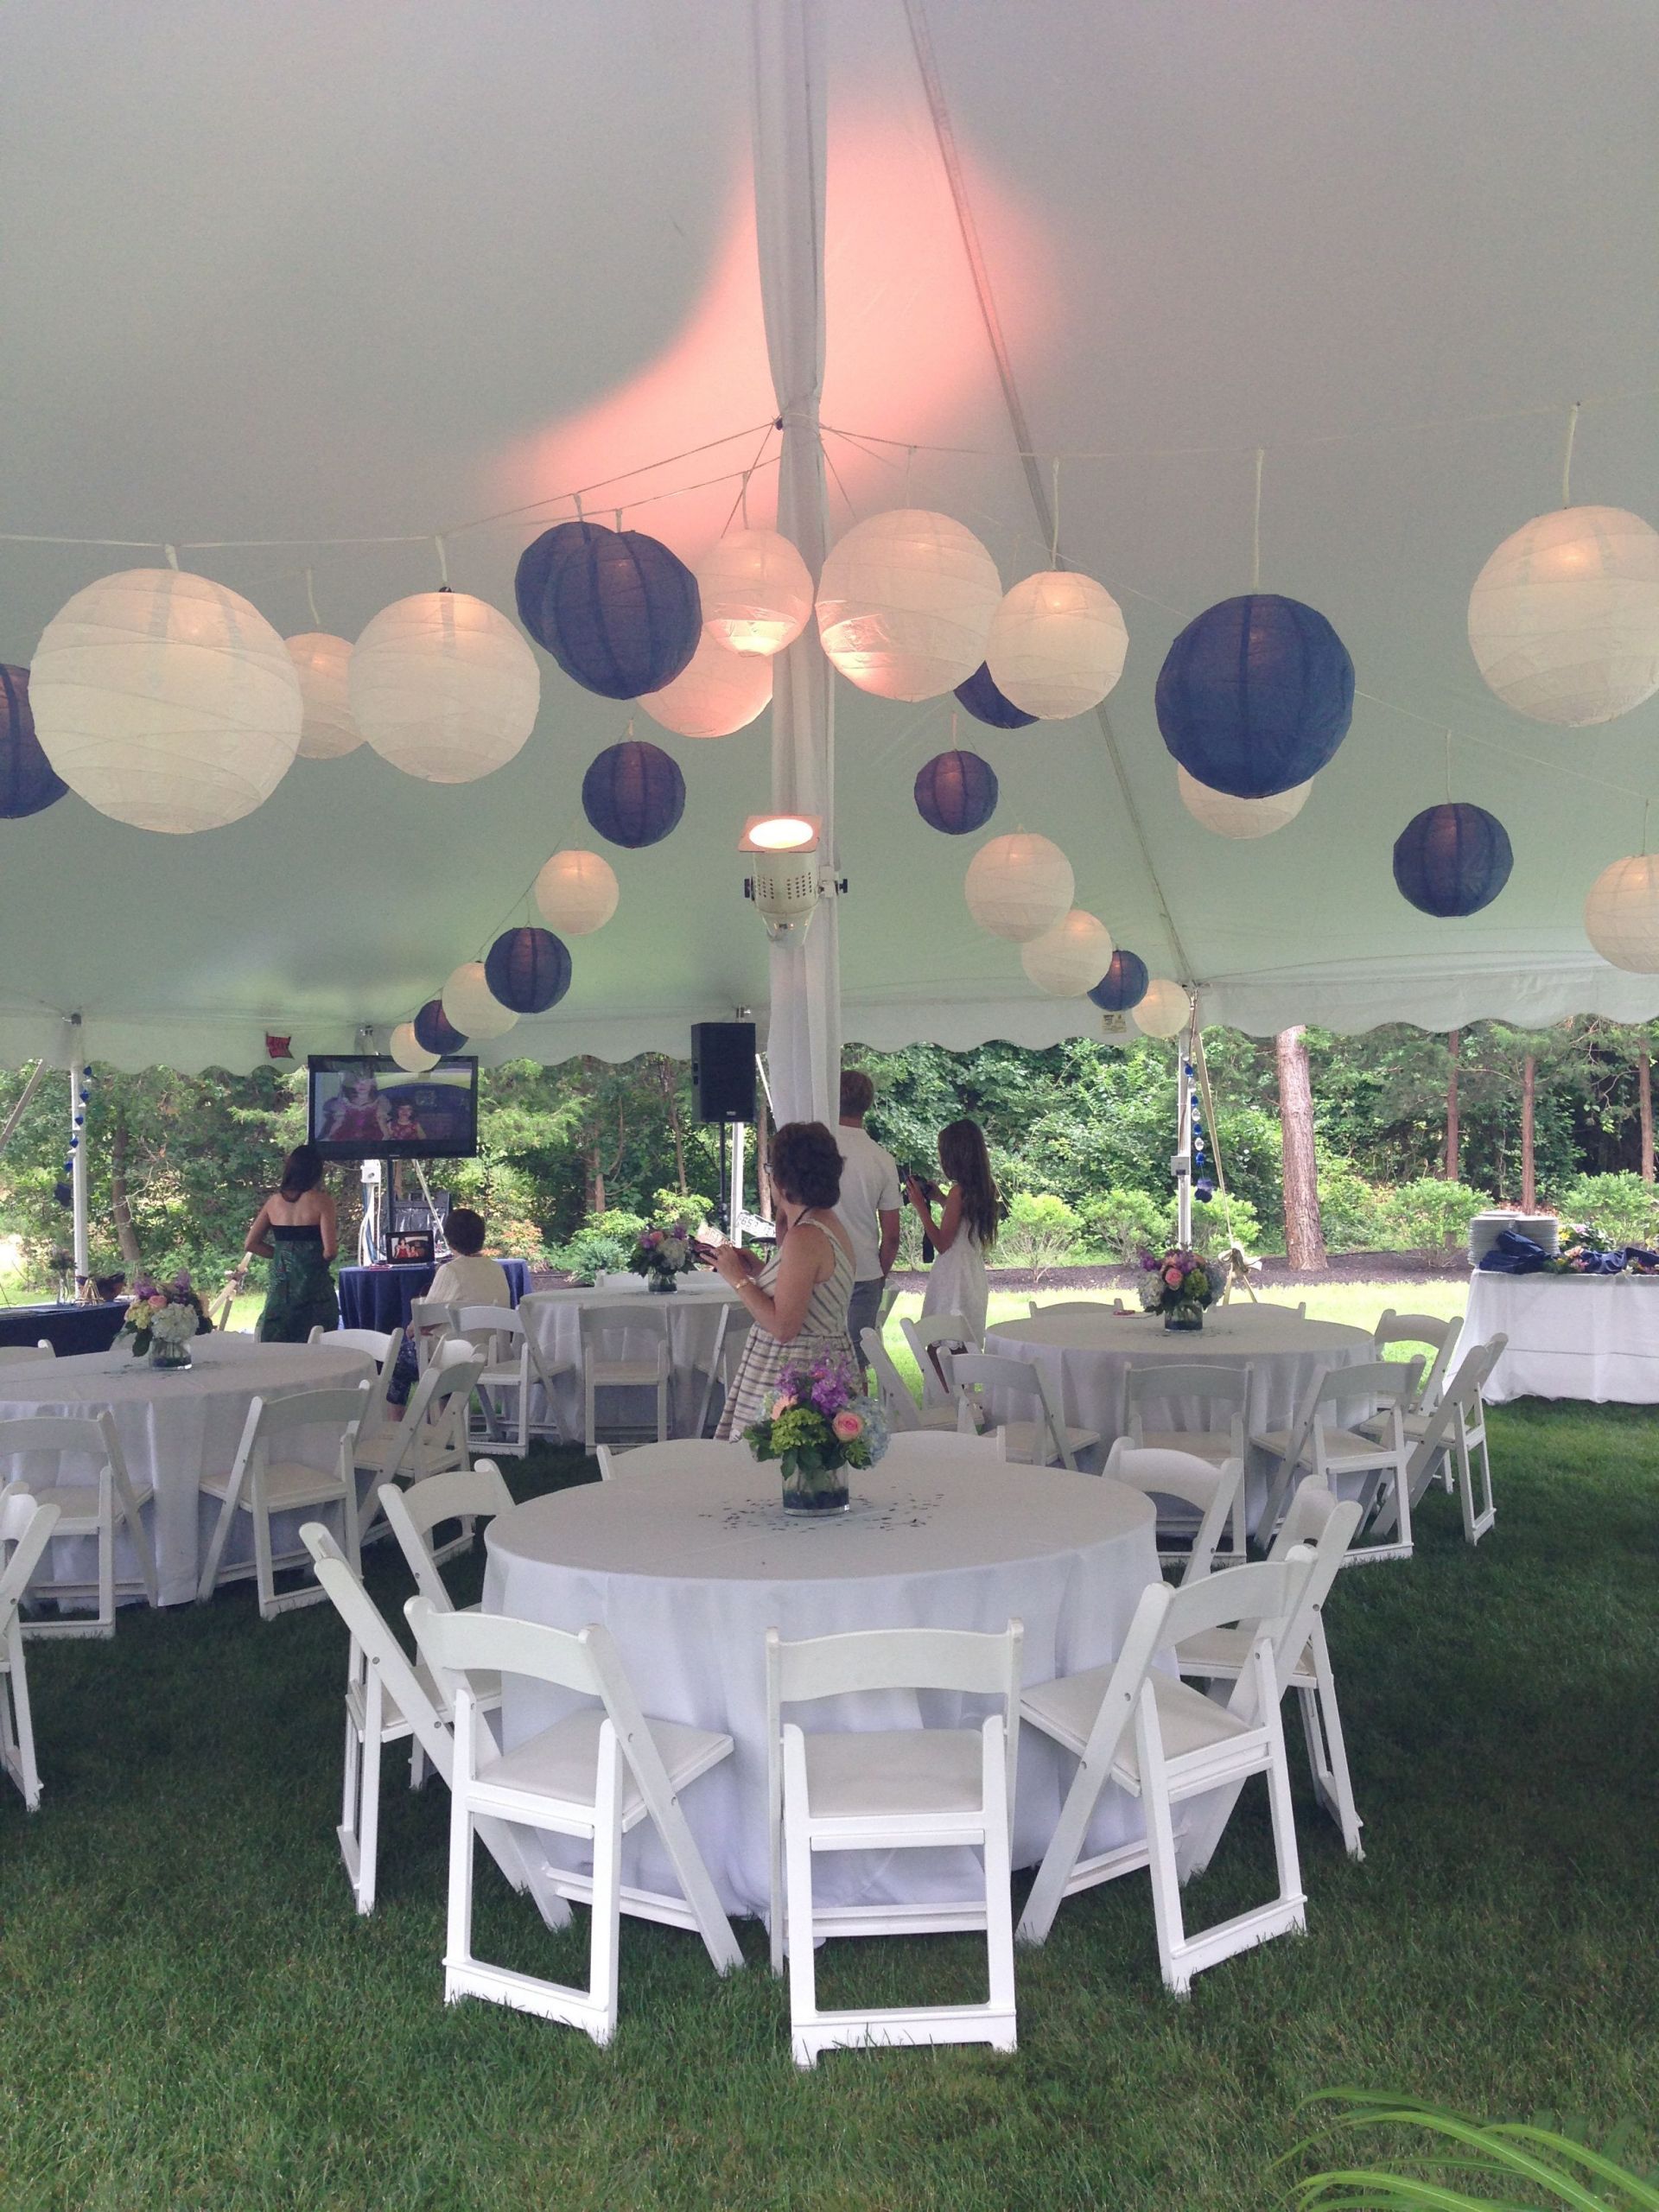 Backyard Graduation Outdoor Graduation Party Ideas
 Tented blue and white graduation party